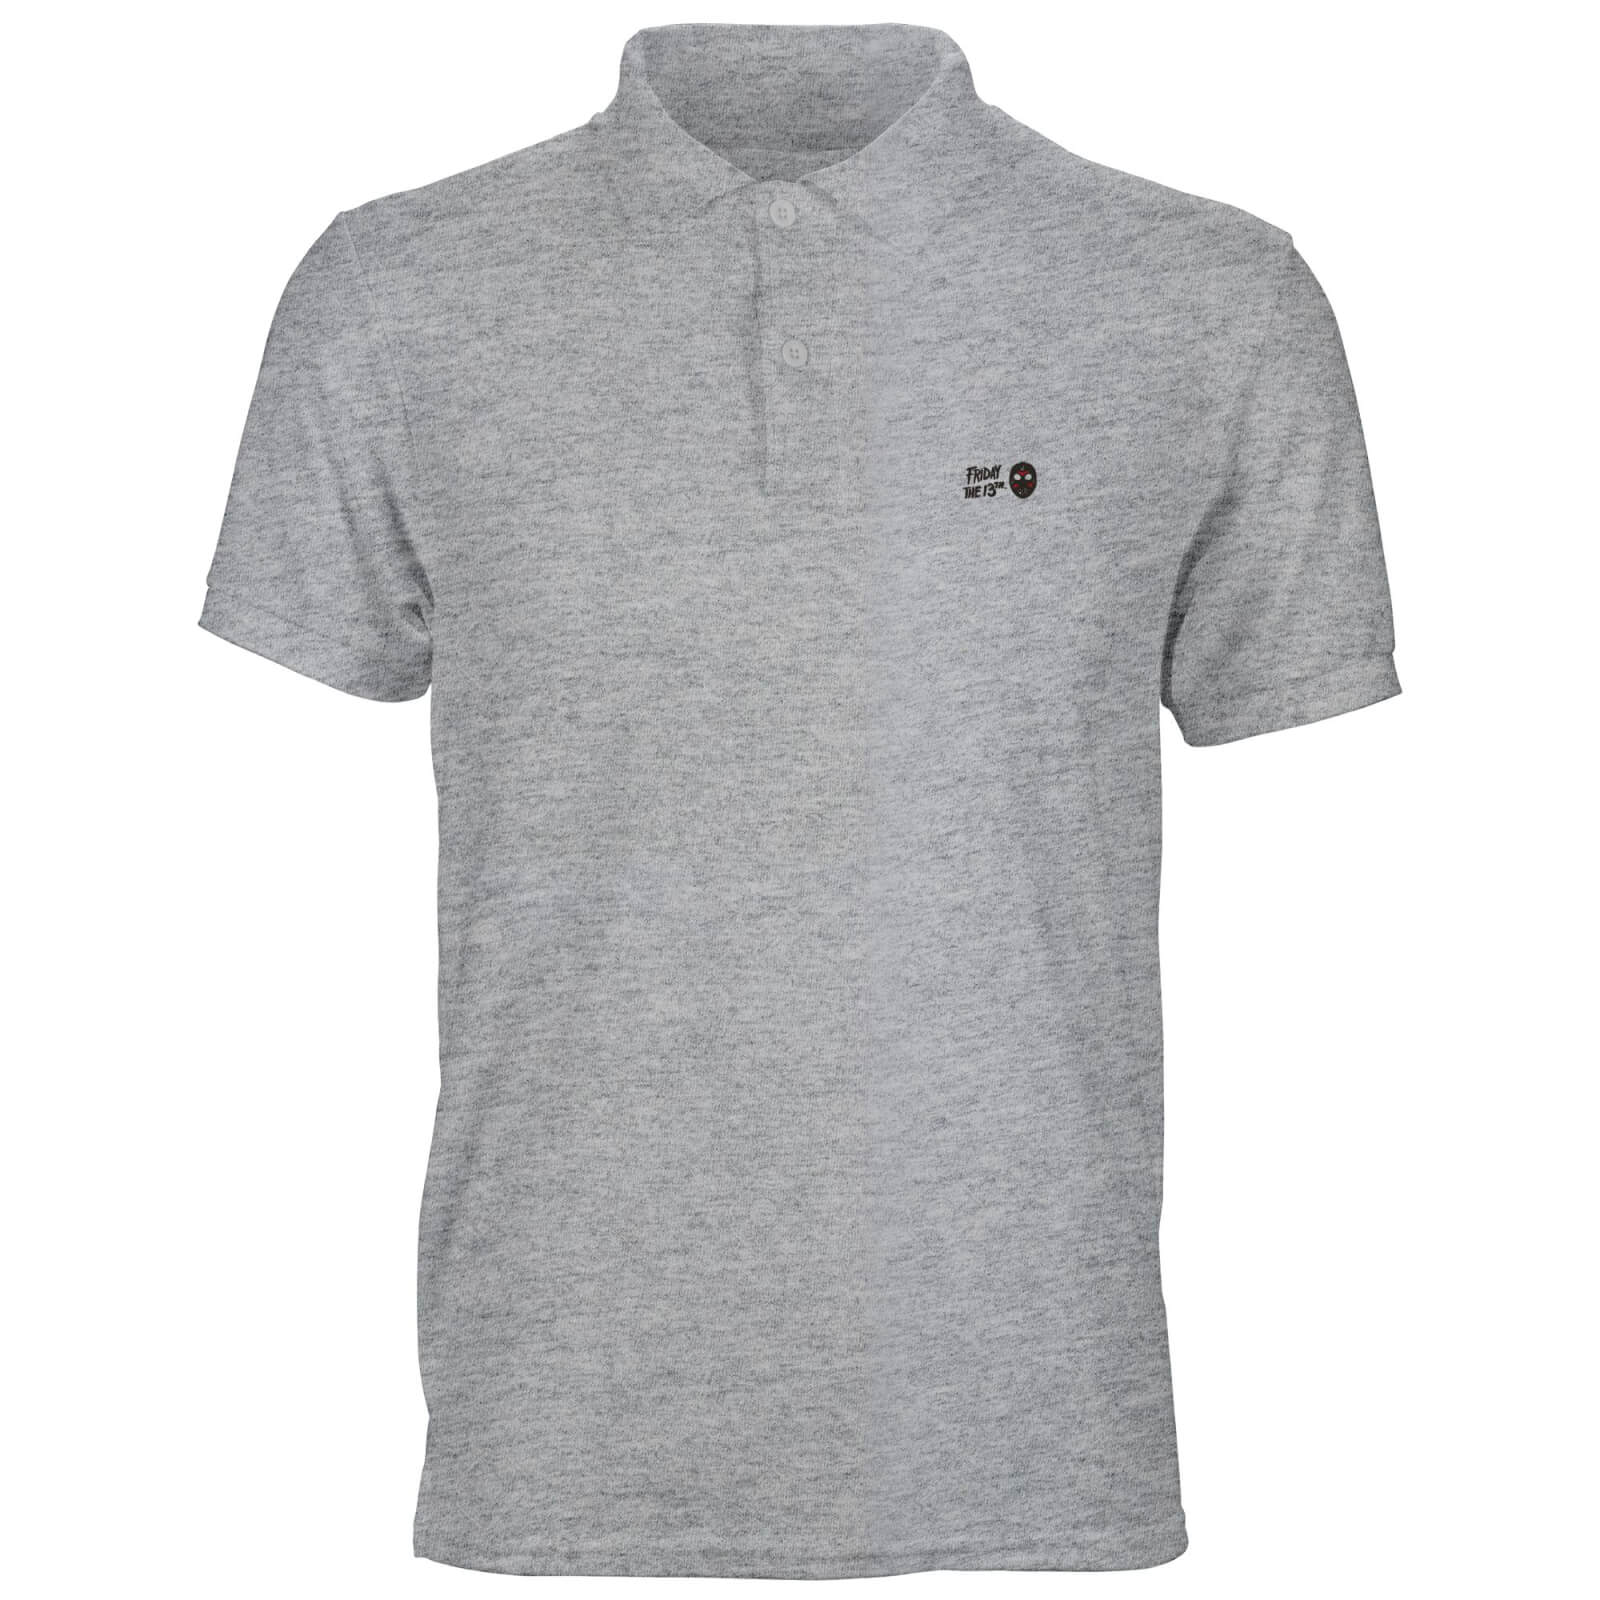 Friday 13th Unisex Polo - Grey - S - Gris